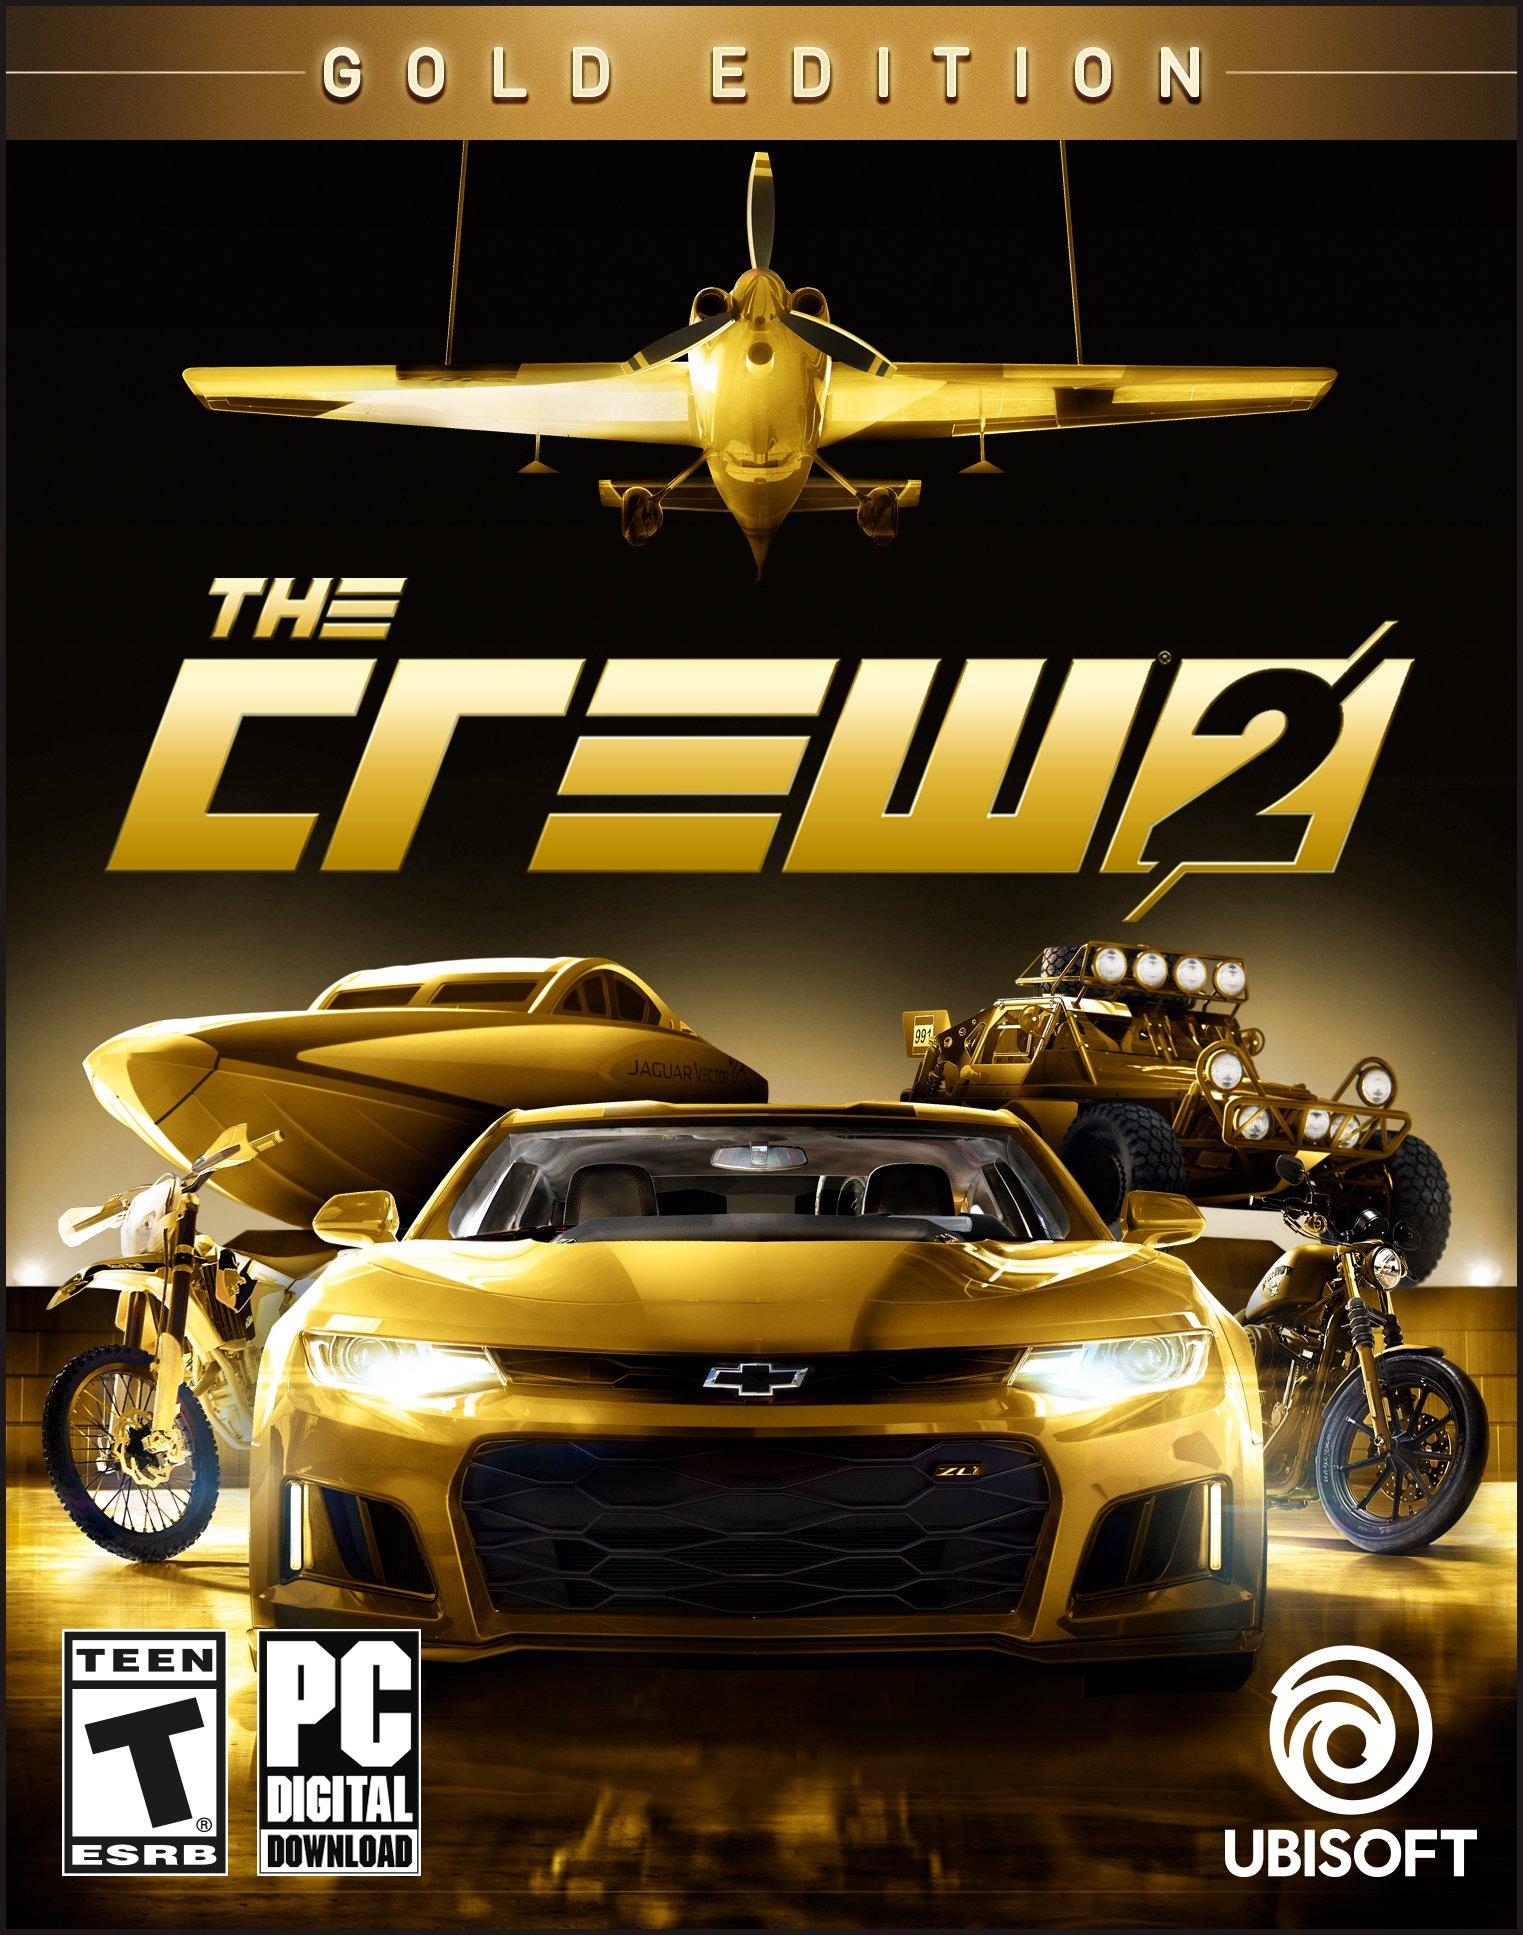 The Crew 2 (PS4) NEW